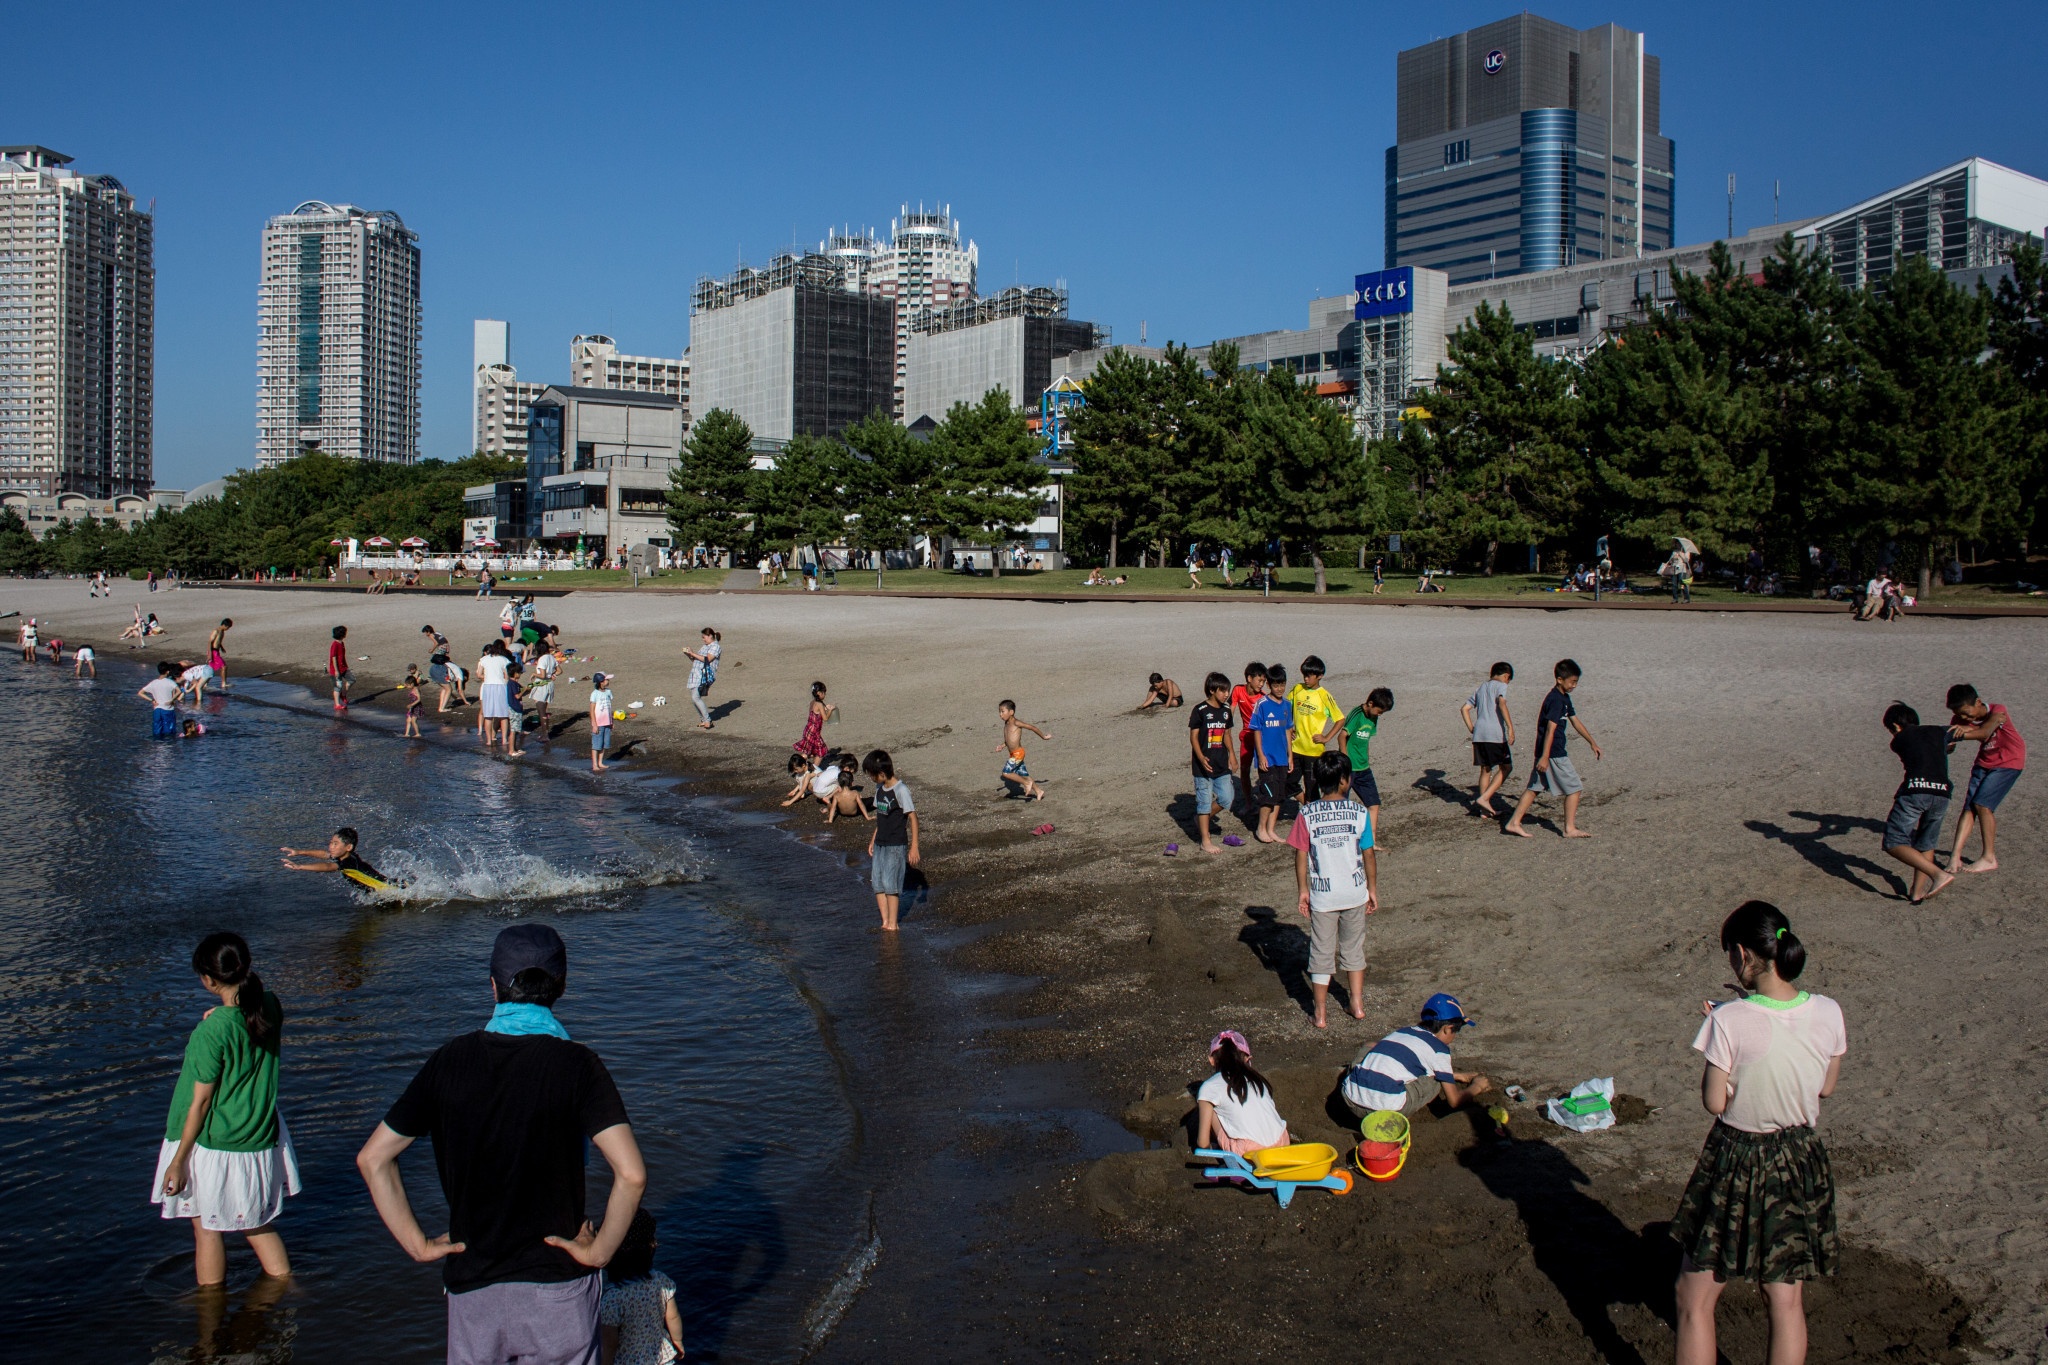 Odaiba Beach in Tokyo has been visited by Paris delegates ©Getty Images